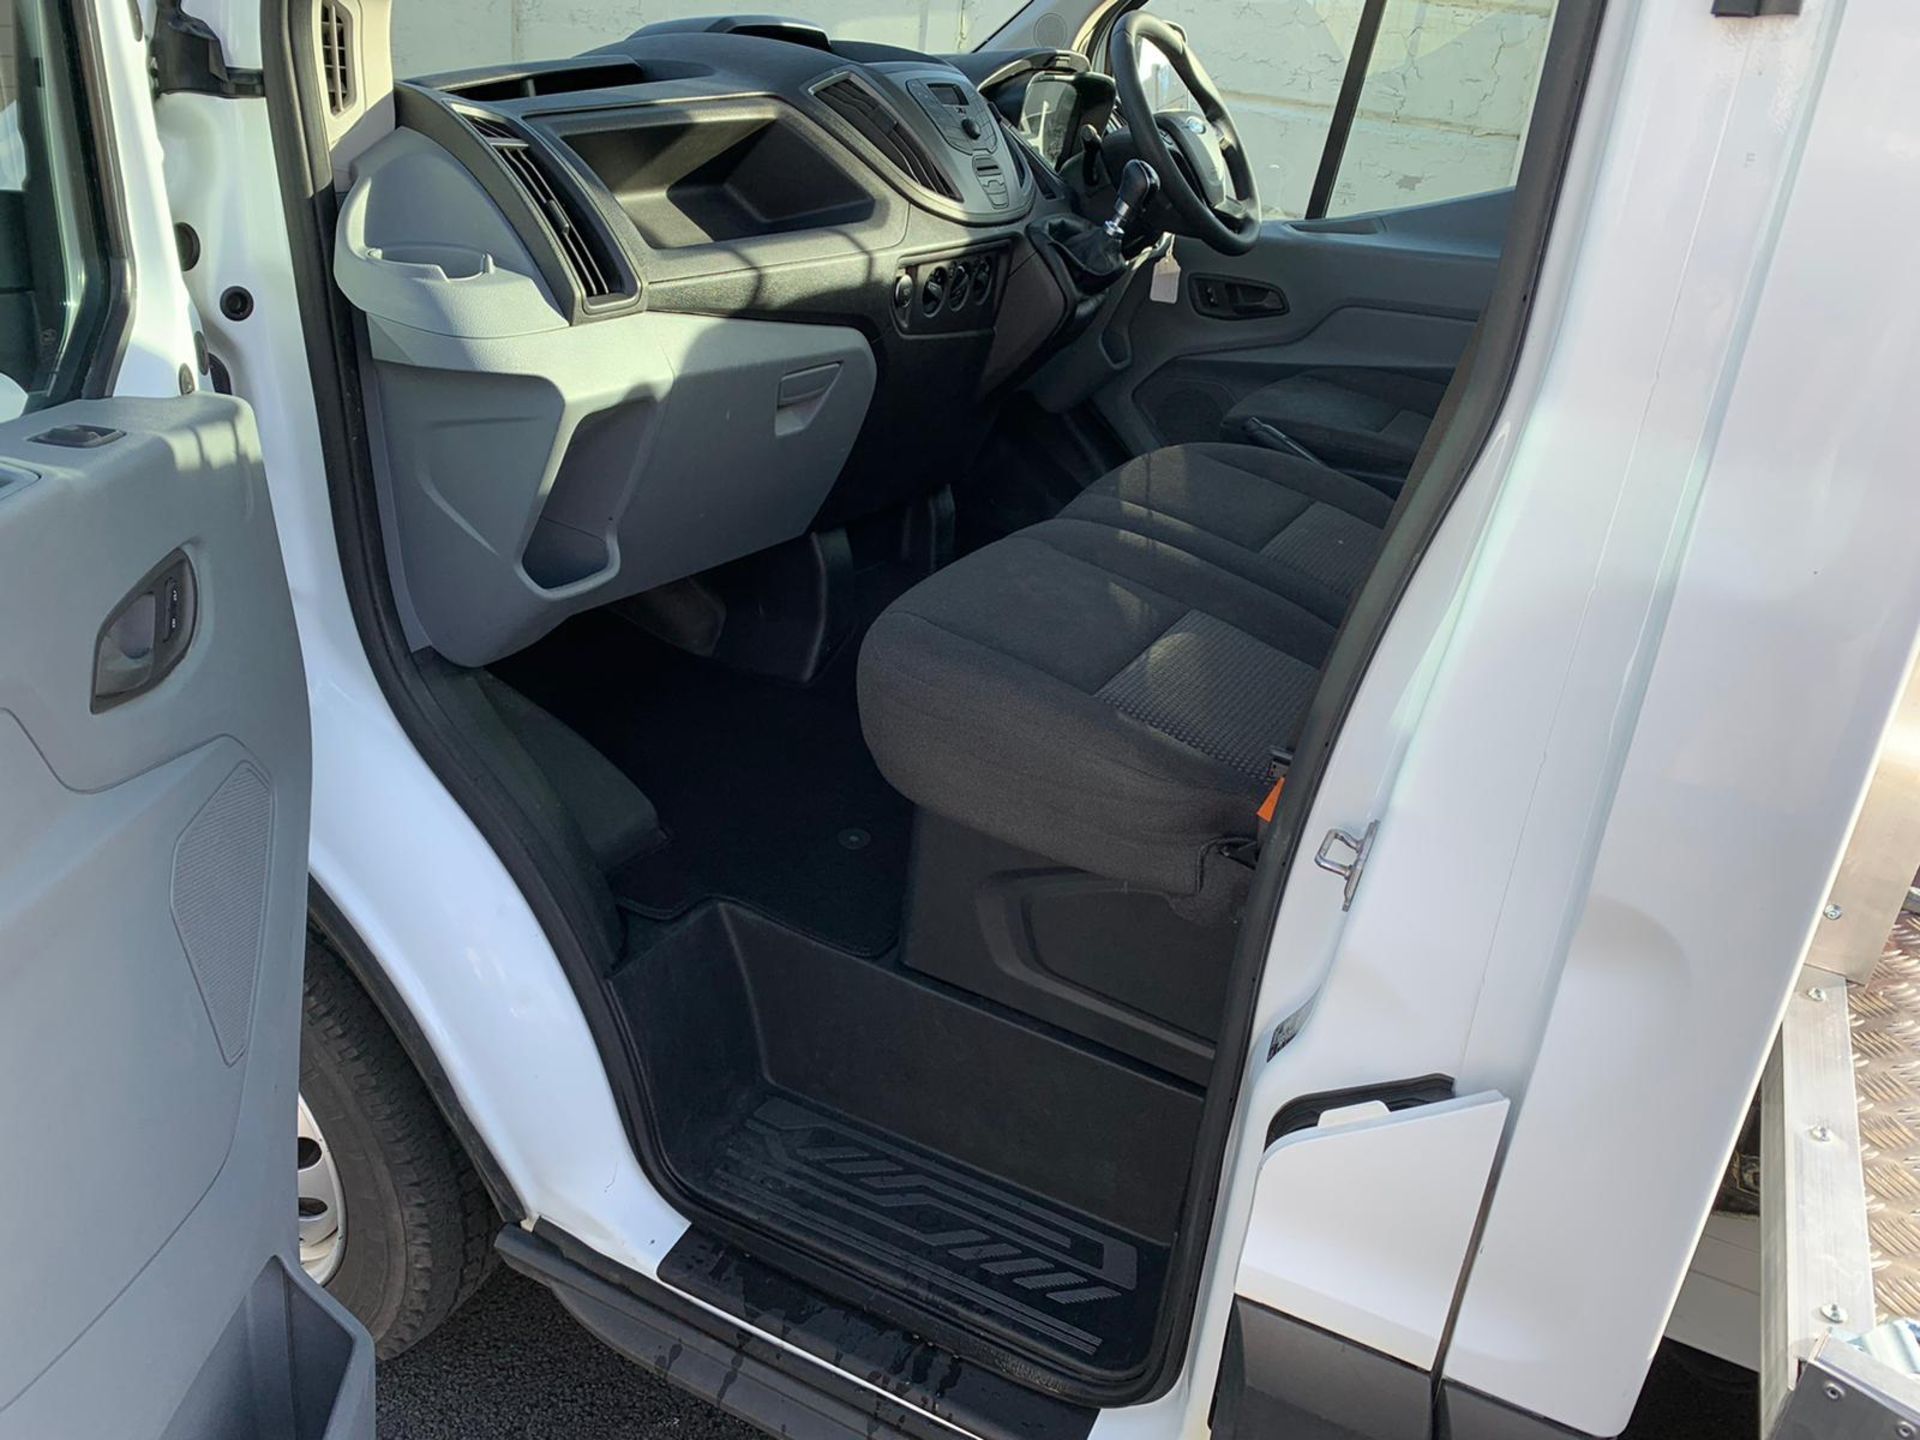 Ford transit recovery truck 2019 - Image 8 of 10